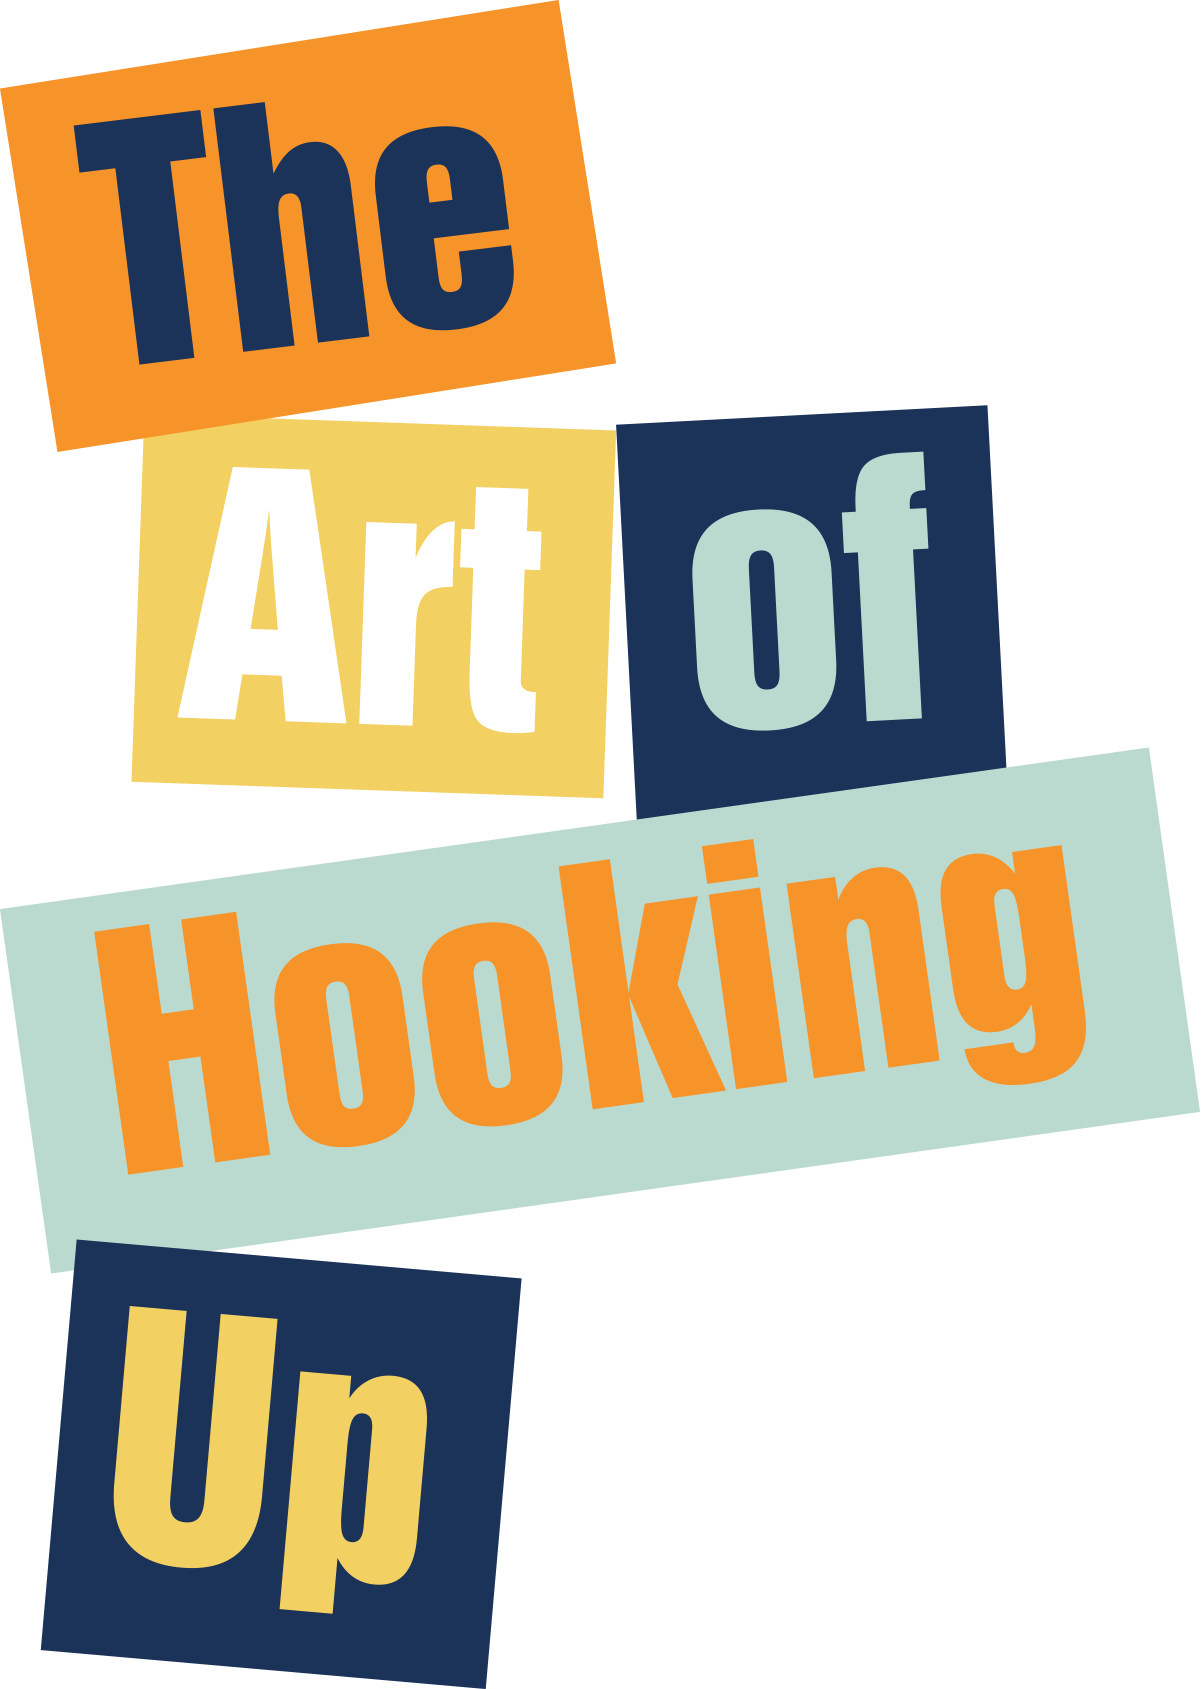 The Art of Hooking Up typography